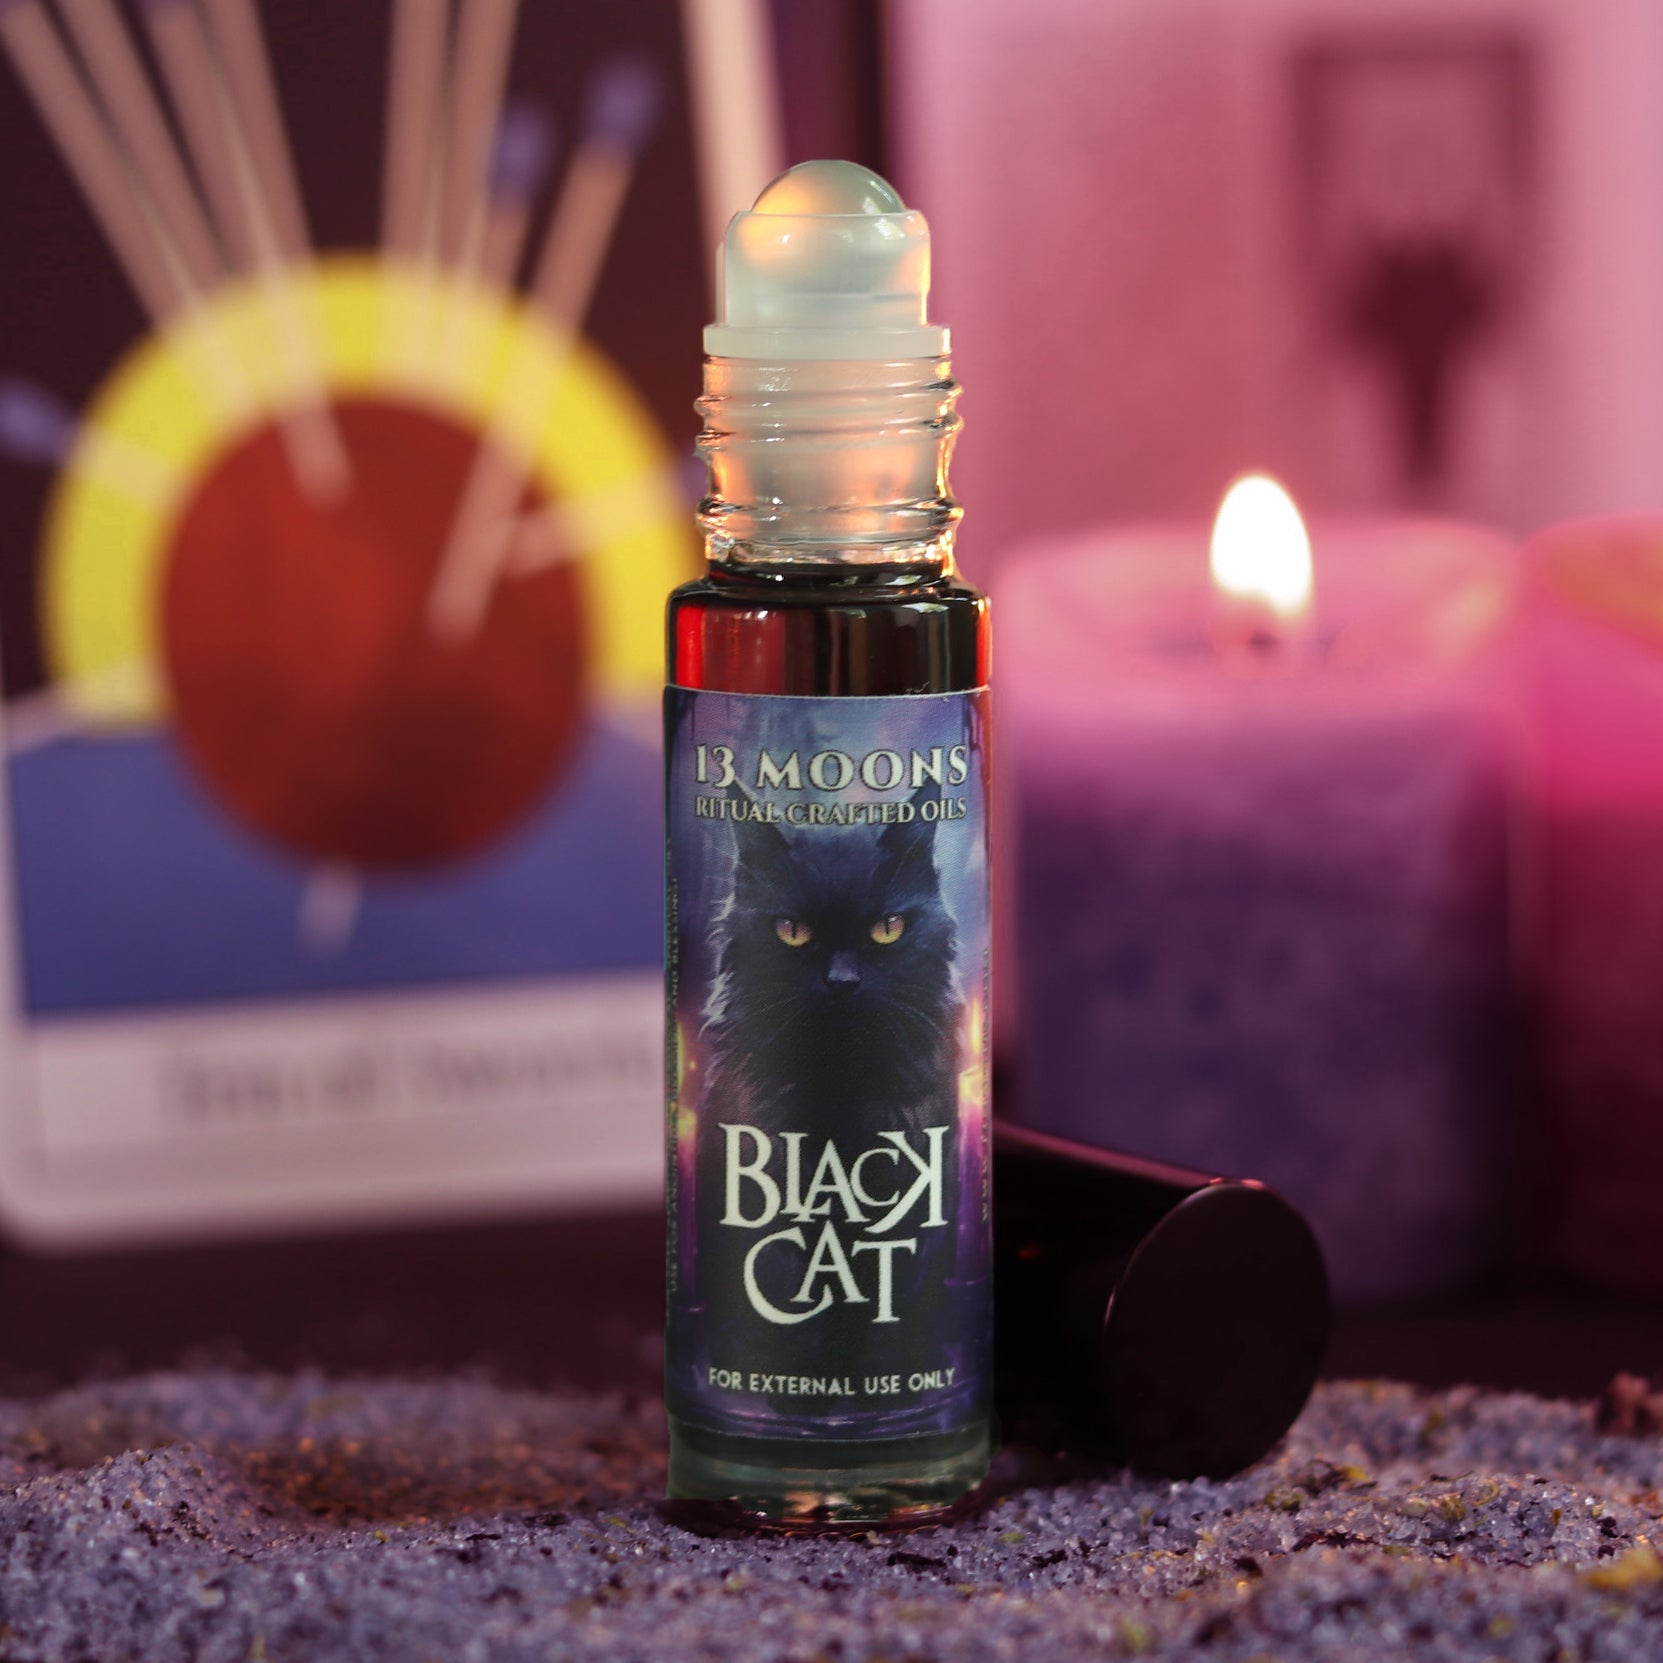 Black Cat Ritual Crafted Oil by 13 Moons - 13 Moons